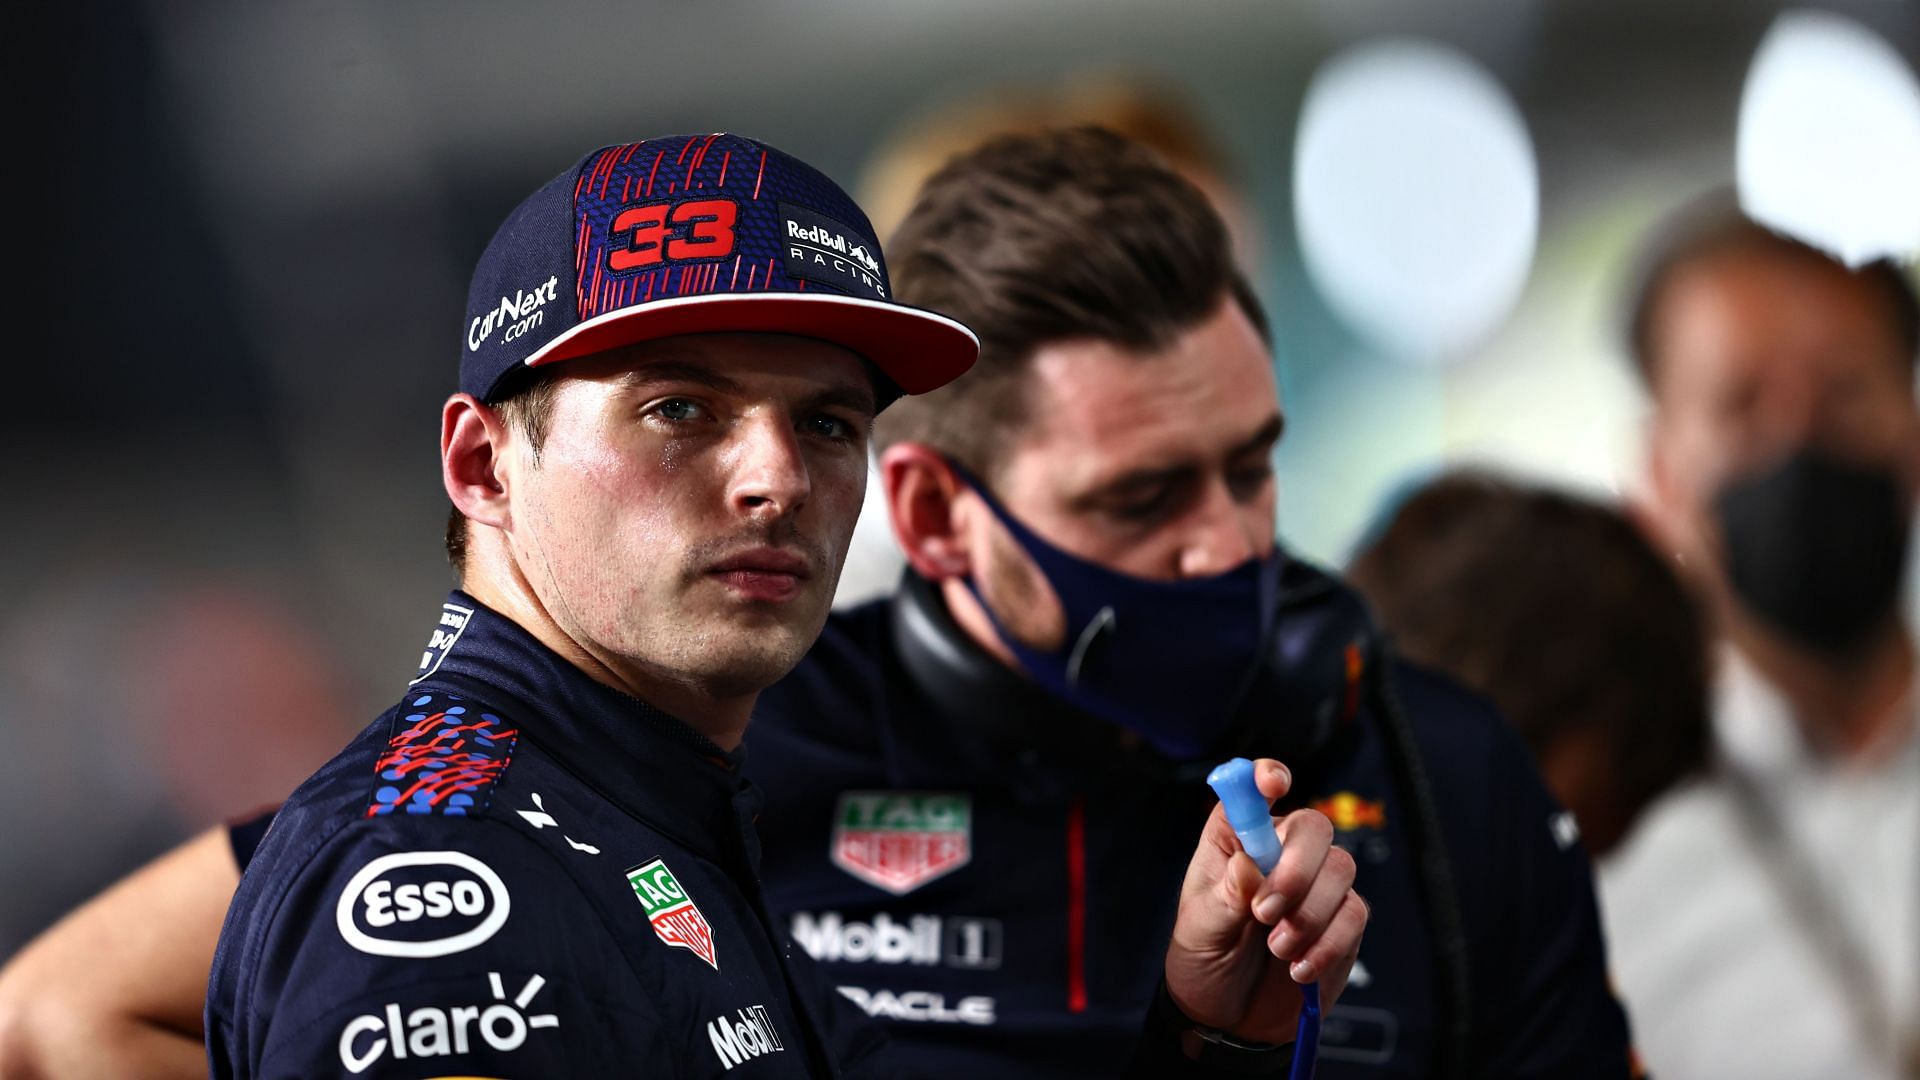 Second place qualifier Max Verstappen looks on in parc ferme.